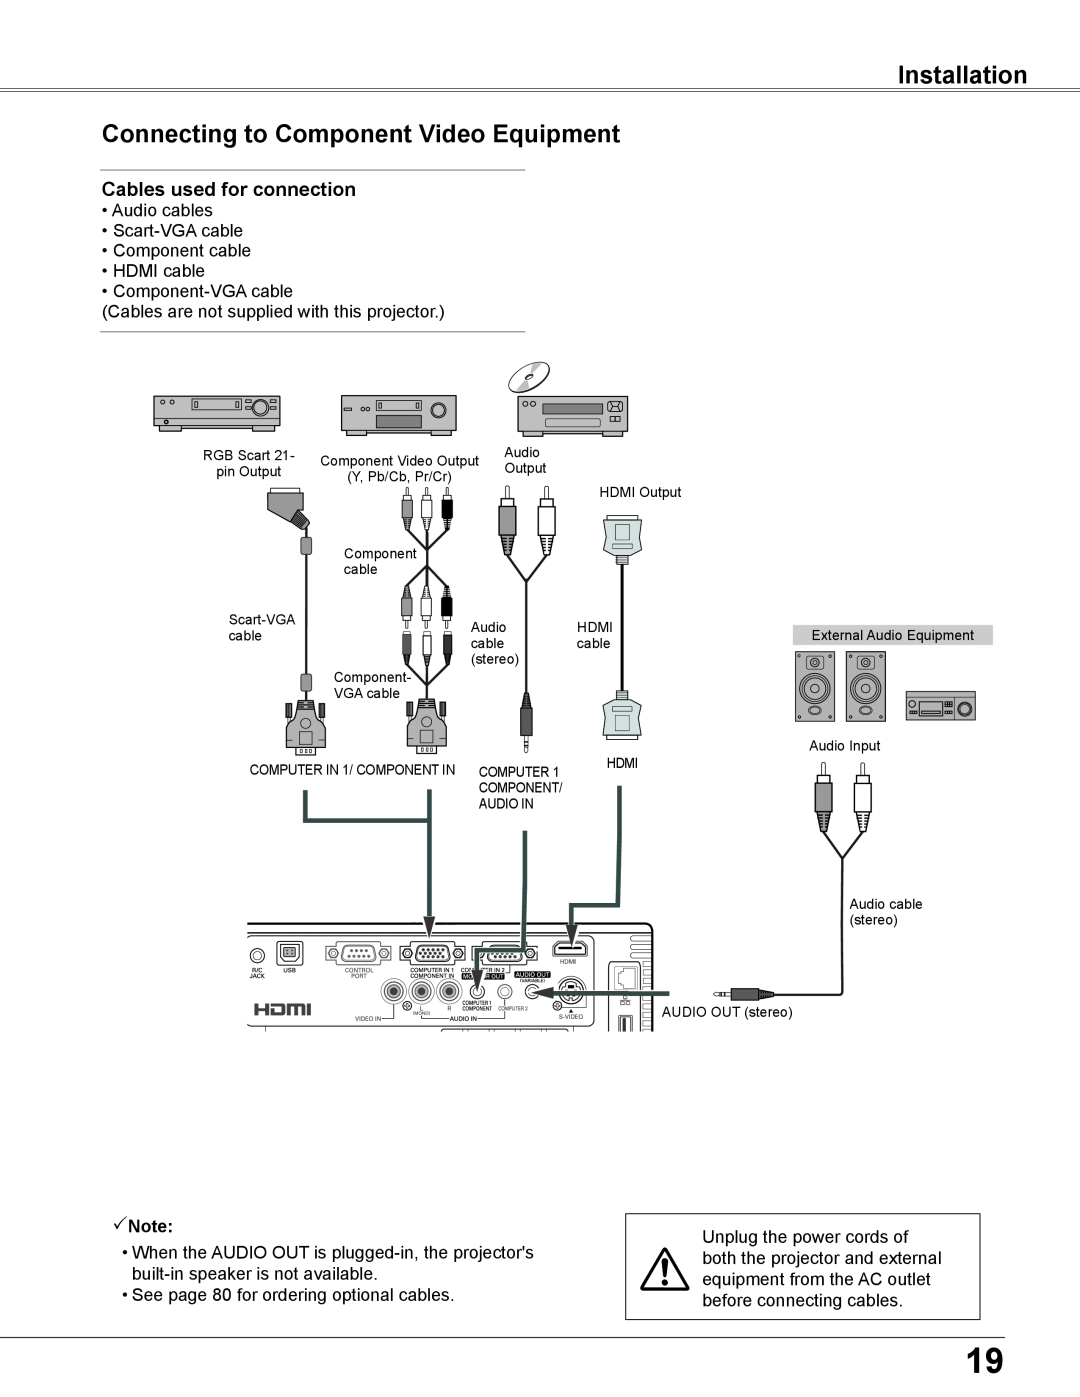 Sanyo WXU700A owner manual Installation, Connecting to Component Video Equipment, Cables used for connection, Note 